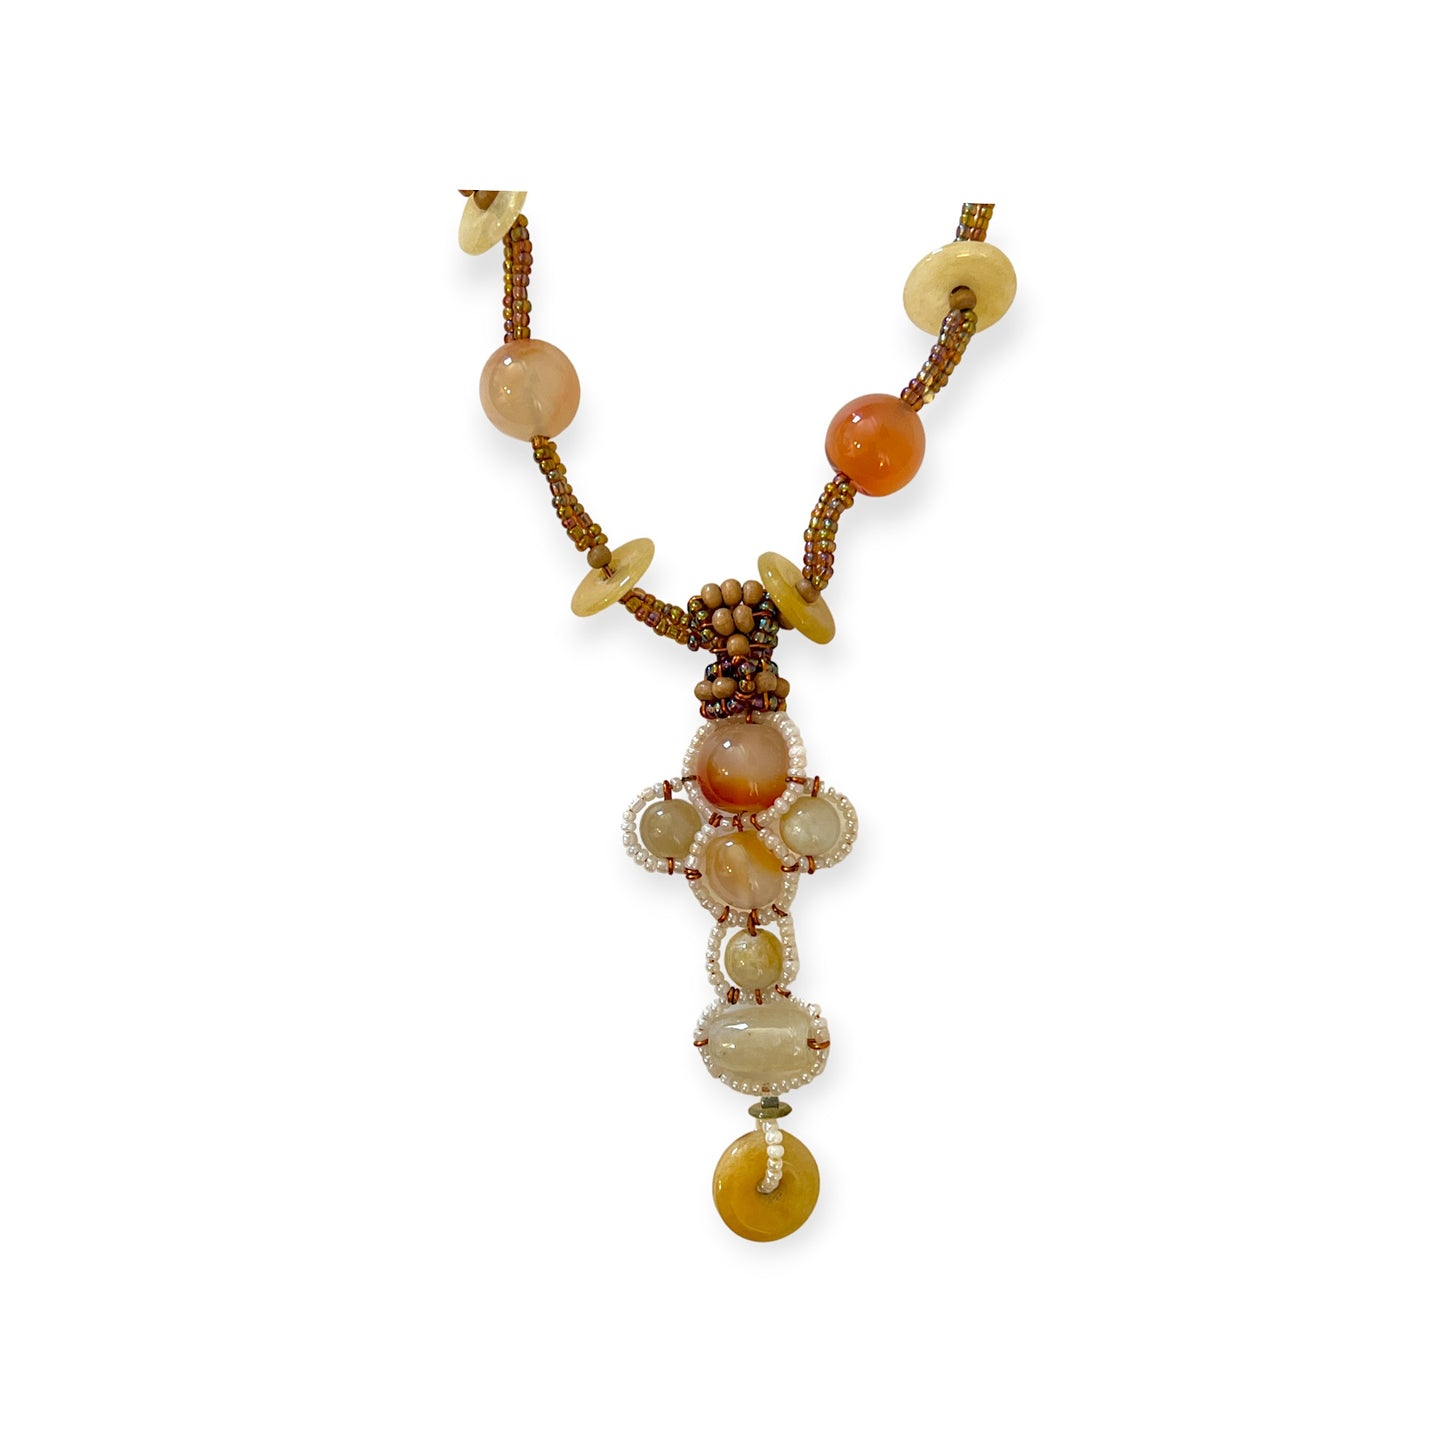 Earth tone amber pendant necklace